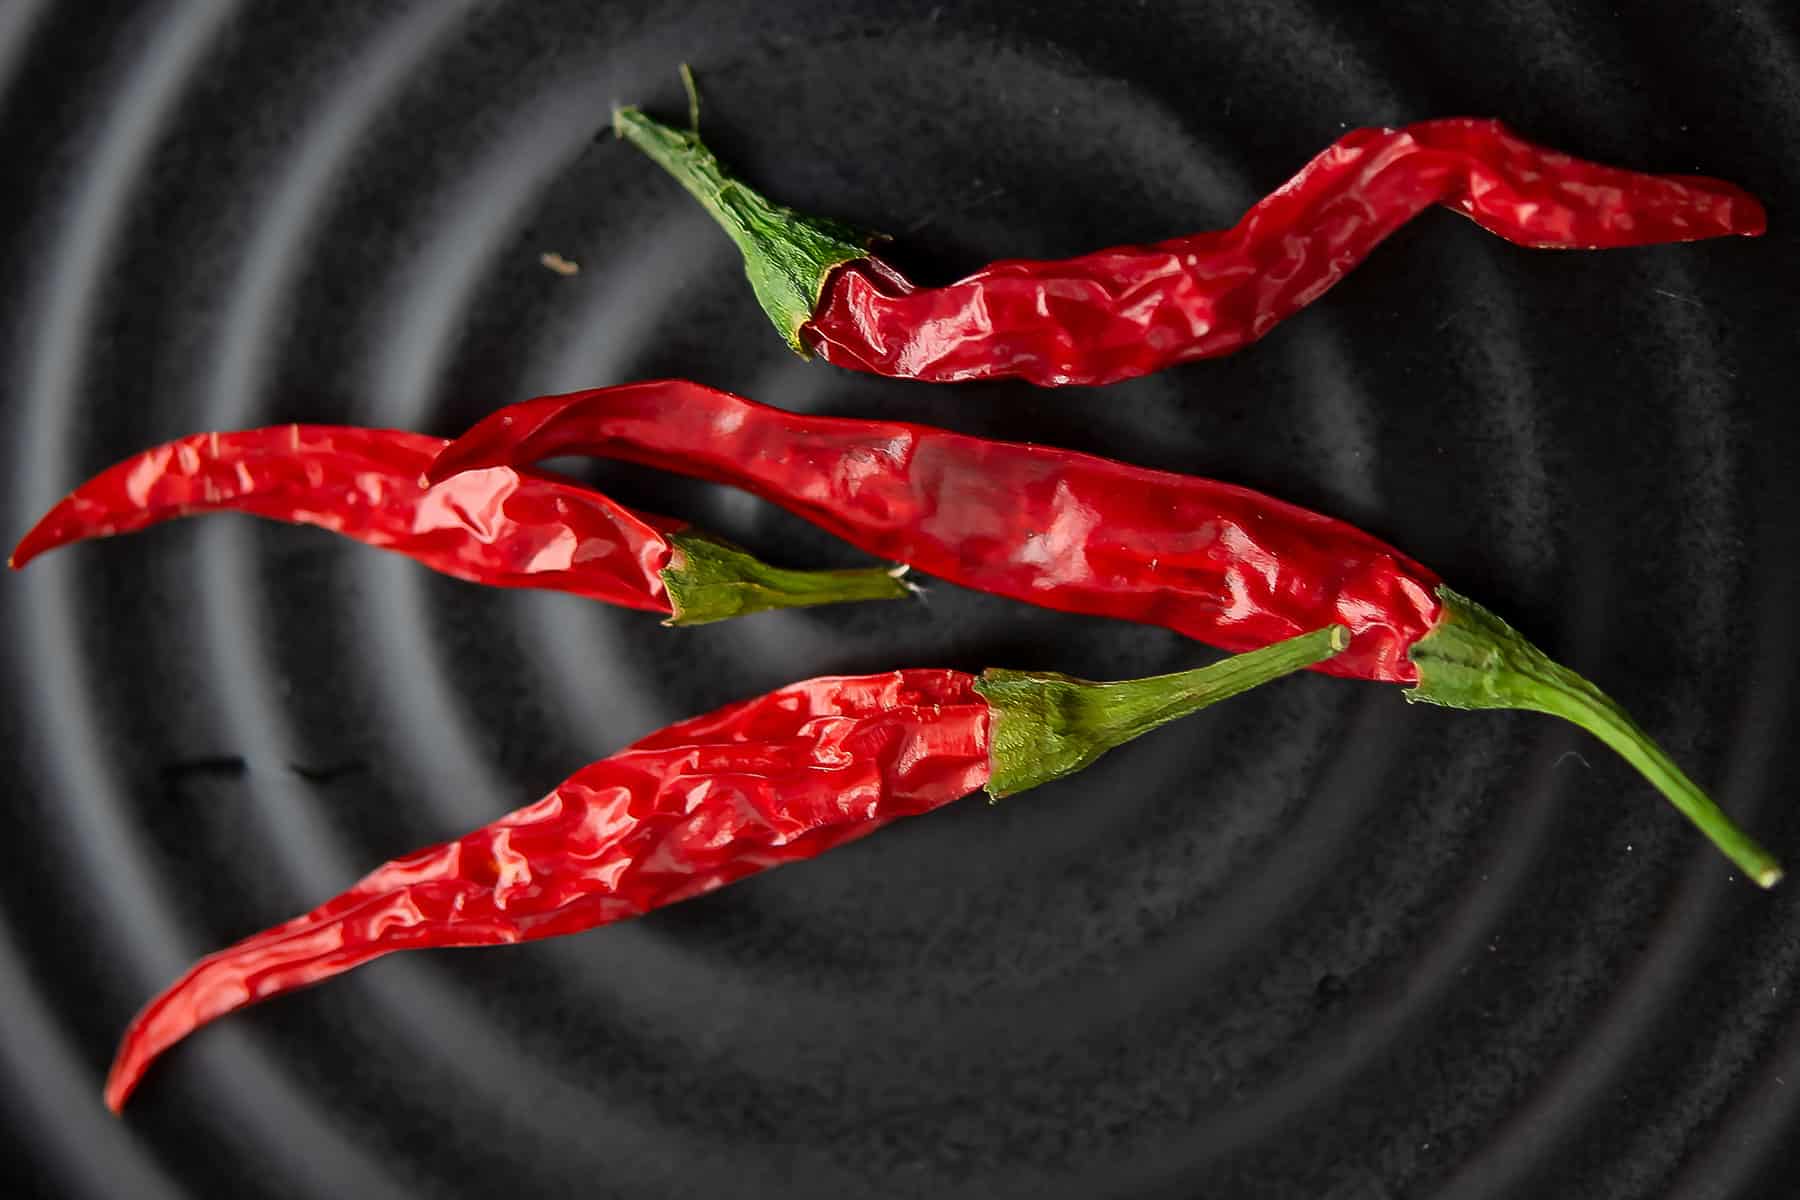 cayenne pepper is rich hot spicy ingredient placed in a black plate